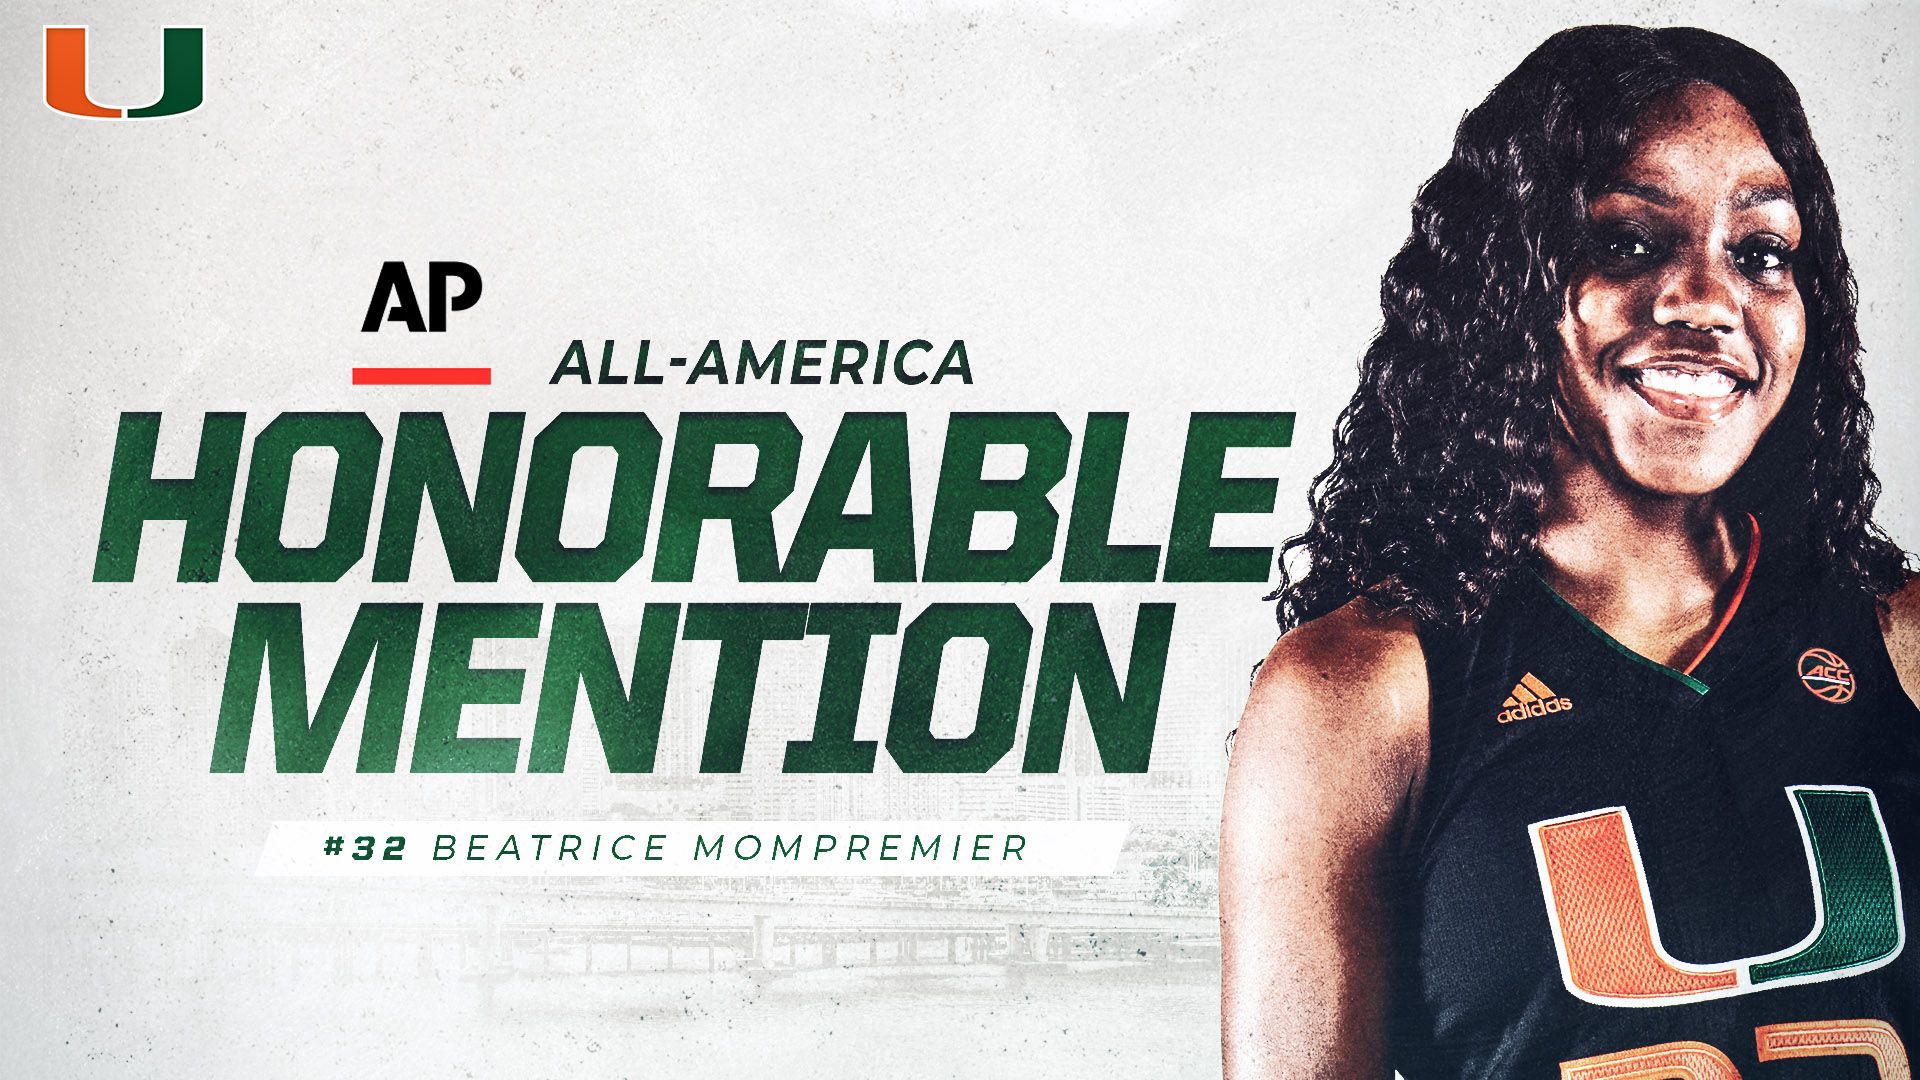 Mompremier Earns AP All-America Honorable Mention